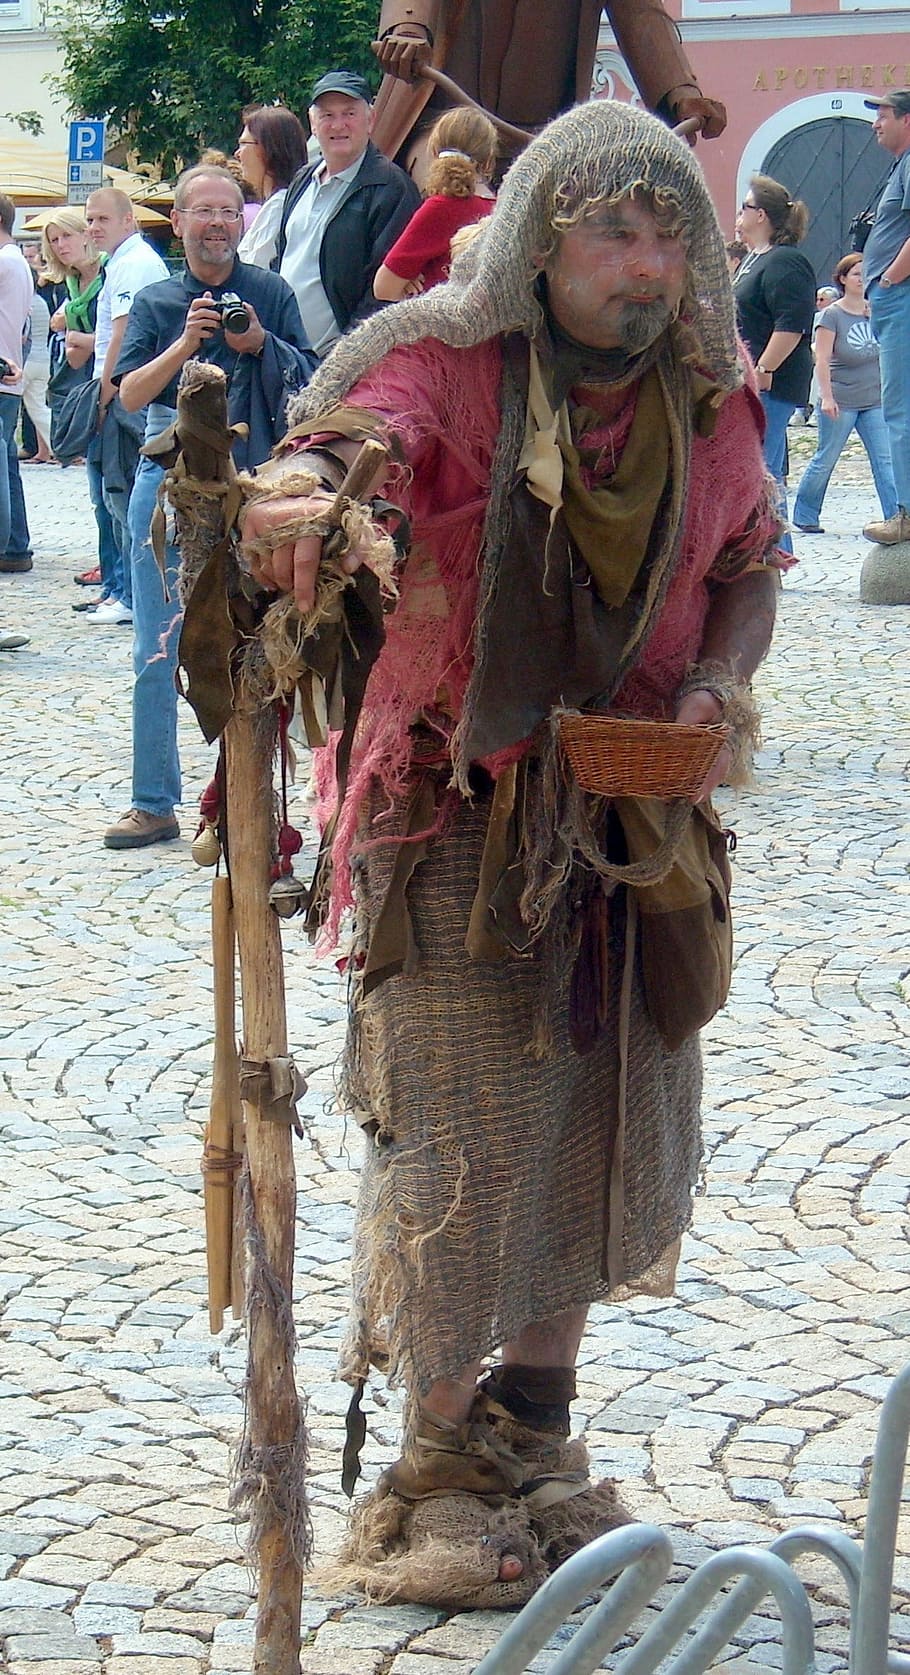 Burghausen, Beggars, Tramp, Attraction, tourist attraction, bavaria, rags, day, adult, mature adult